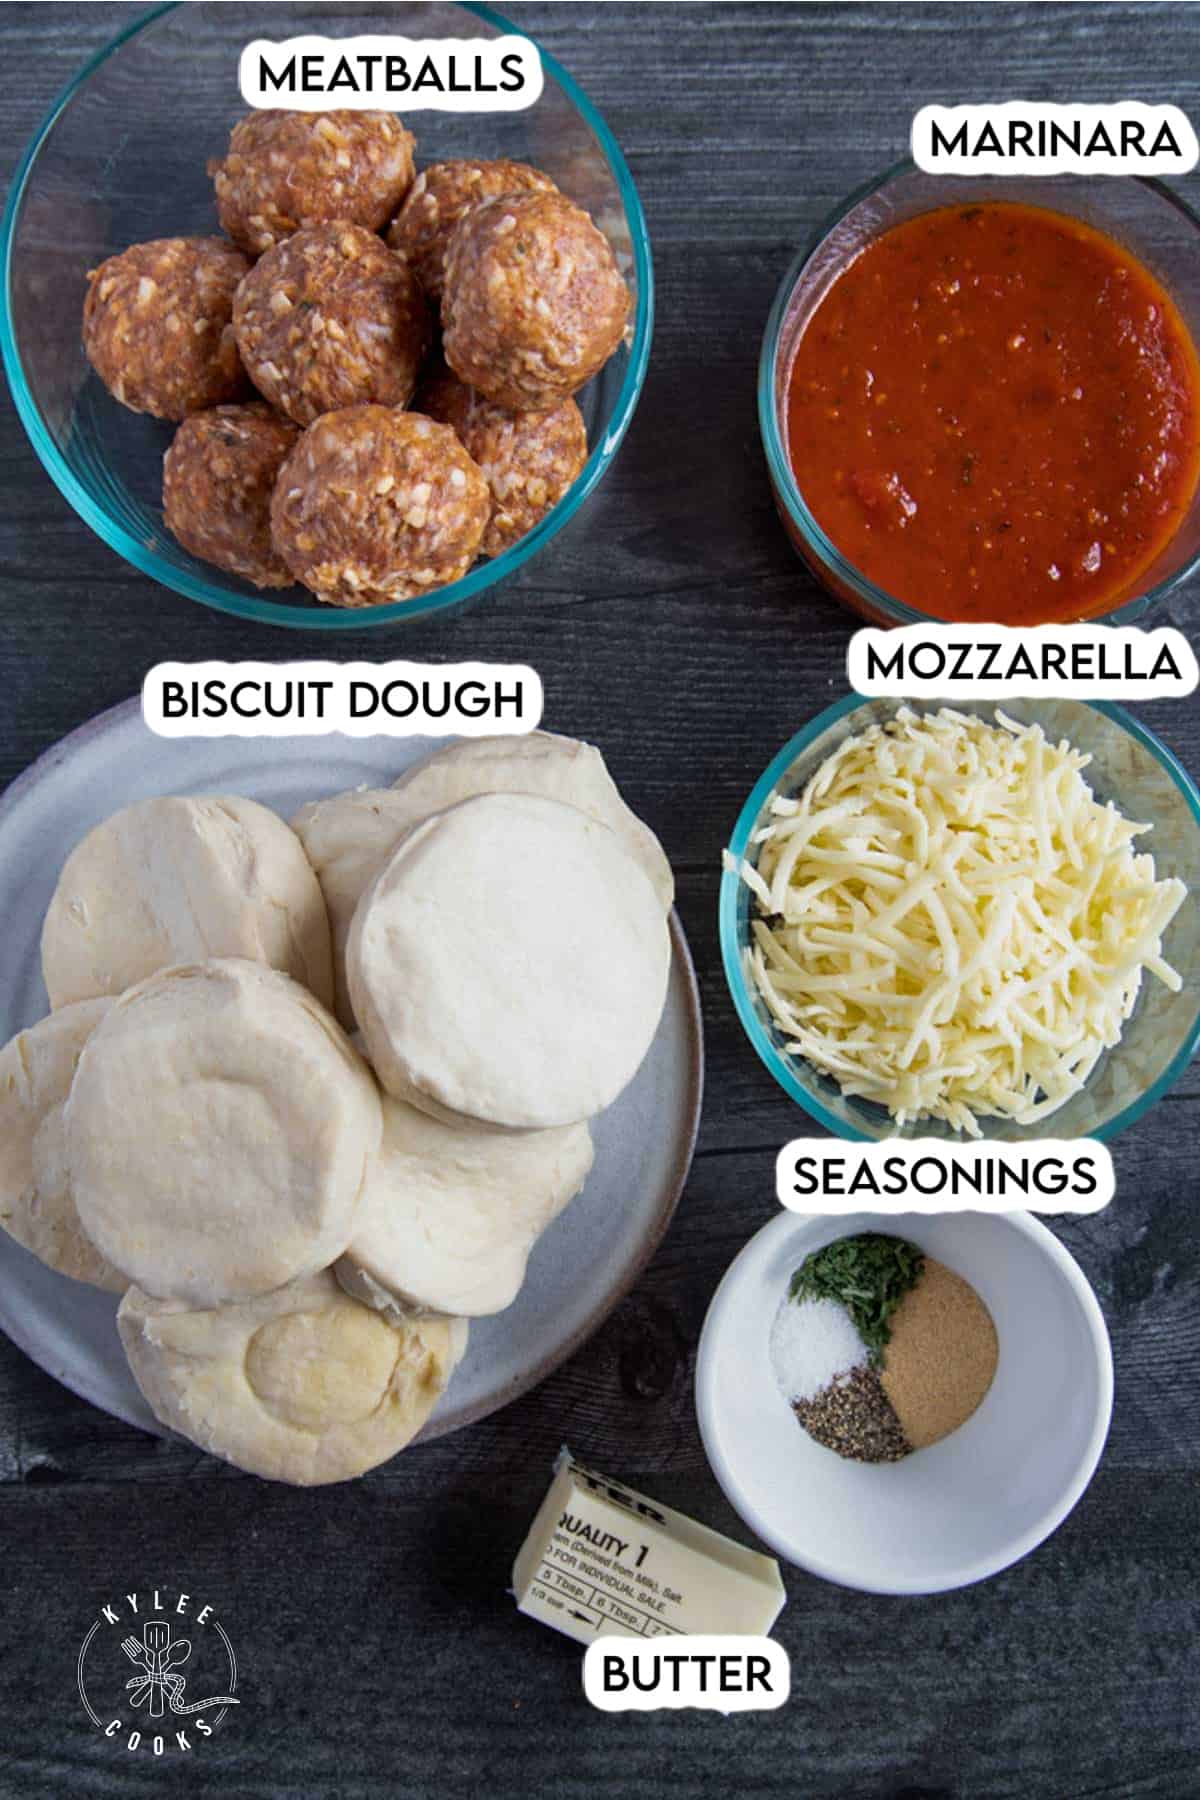 meatball bombs ingredients laid out and labeled.